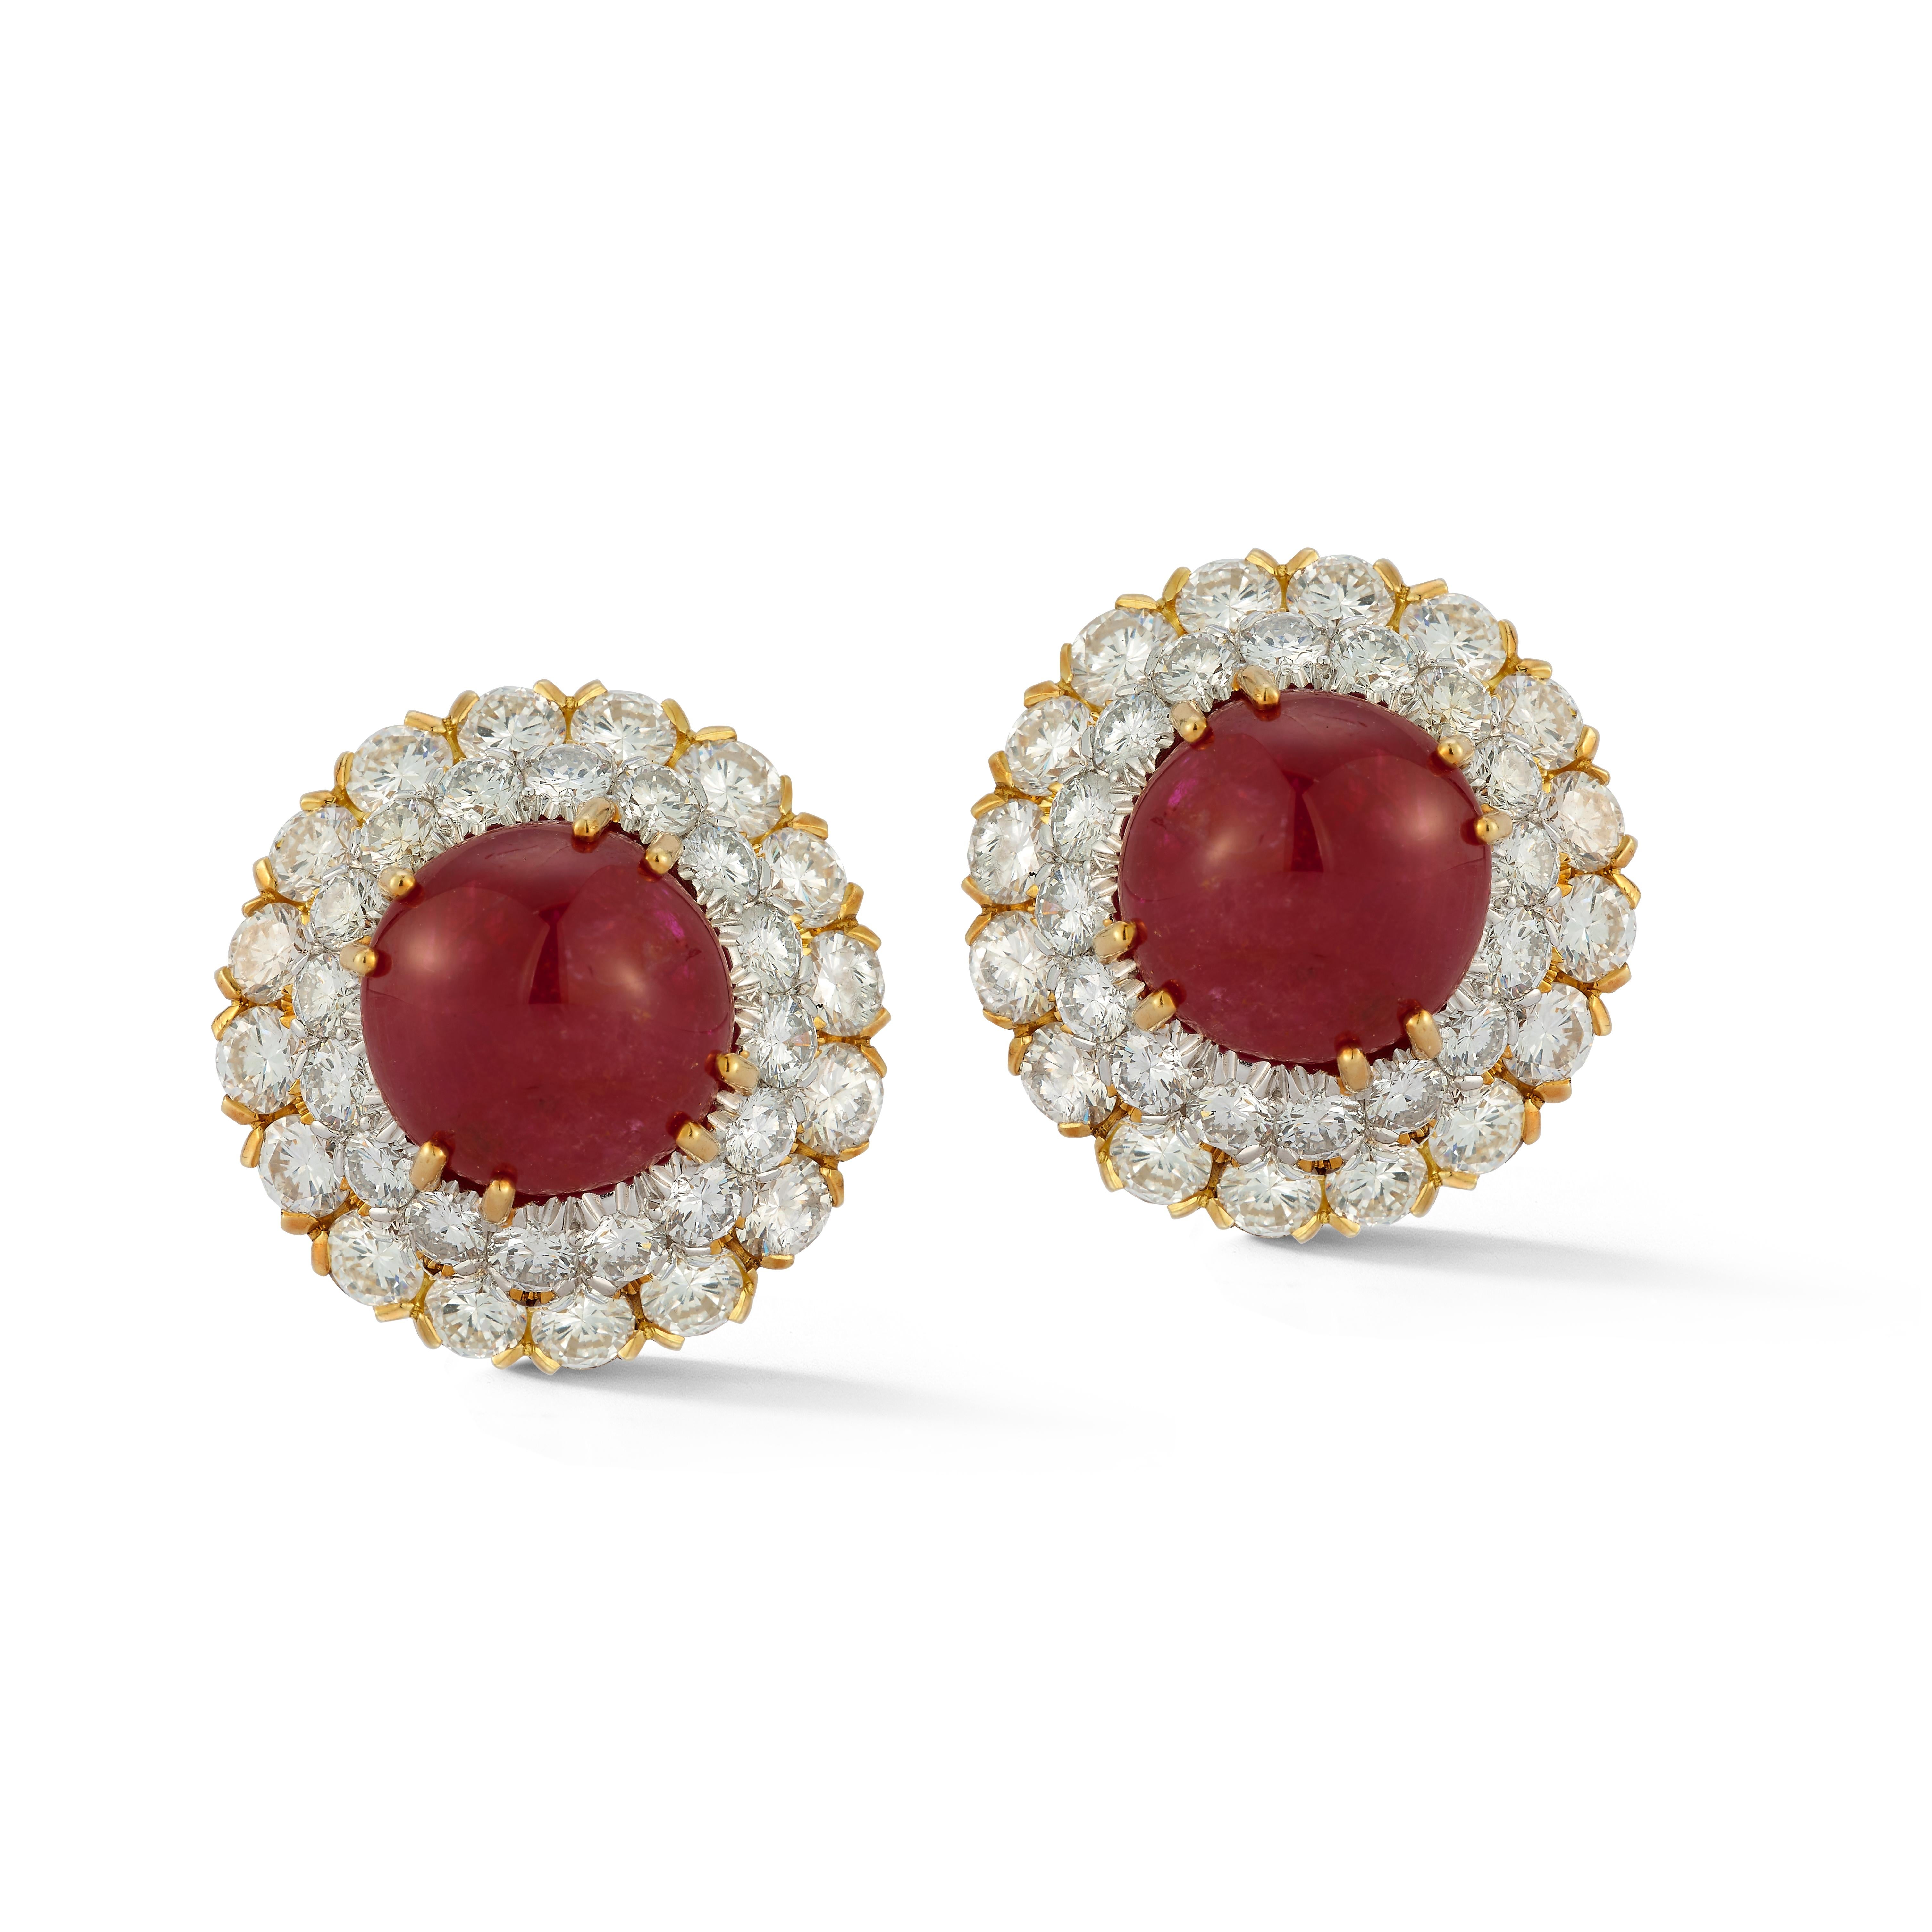 David Webb Certified unheated Burmese Ruby & Diamond Earrings

A pair of platinum and 18 karat gold earrings set with 2 non heated Burmese cabochon rubies encircled by 2 rows round cut diamonds

Signed Webb

Stamped Plat 18K

Accompanied by an AGL